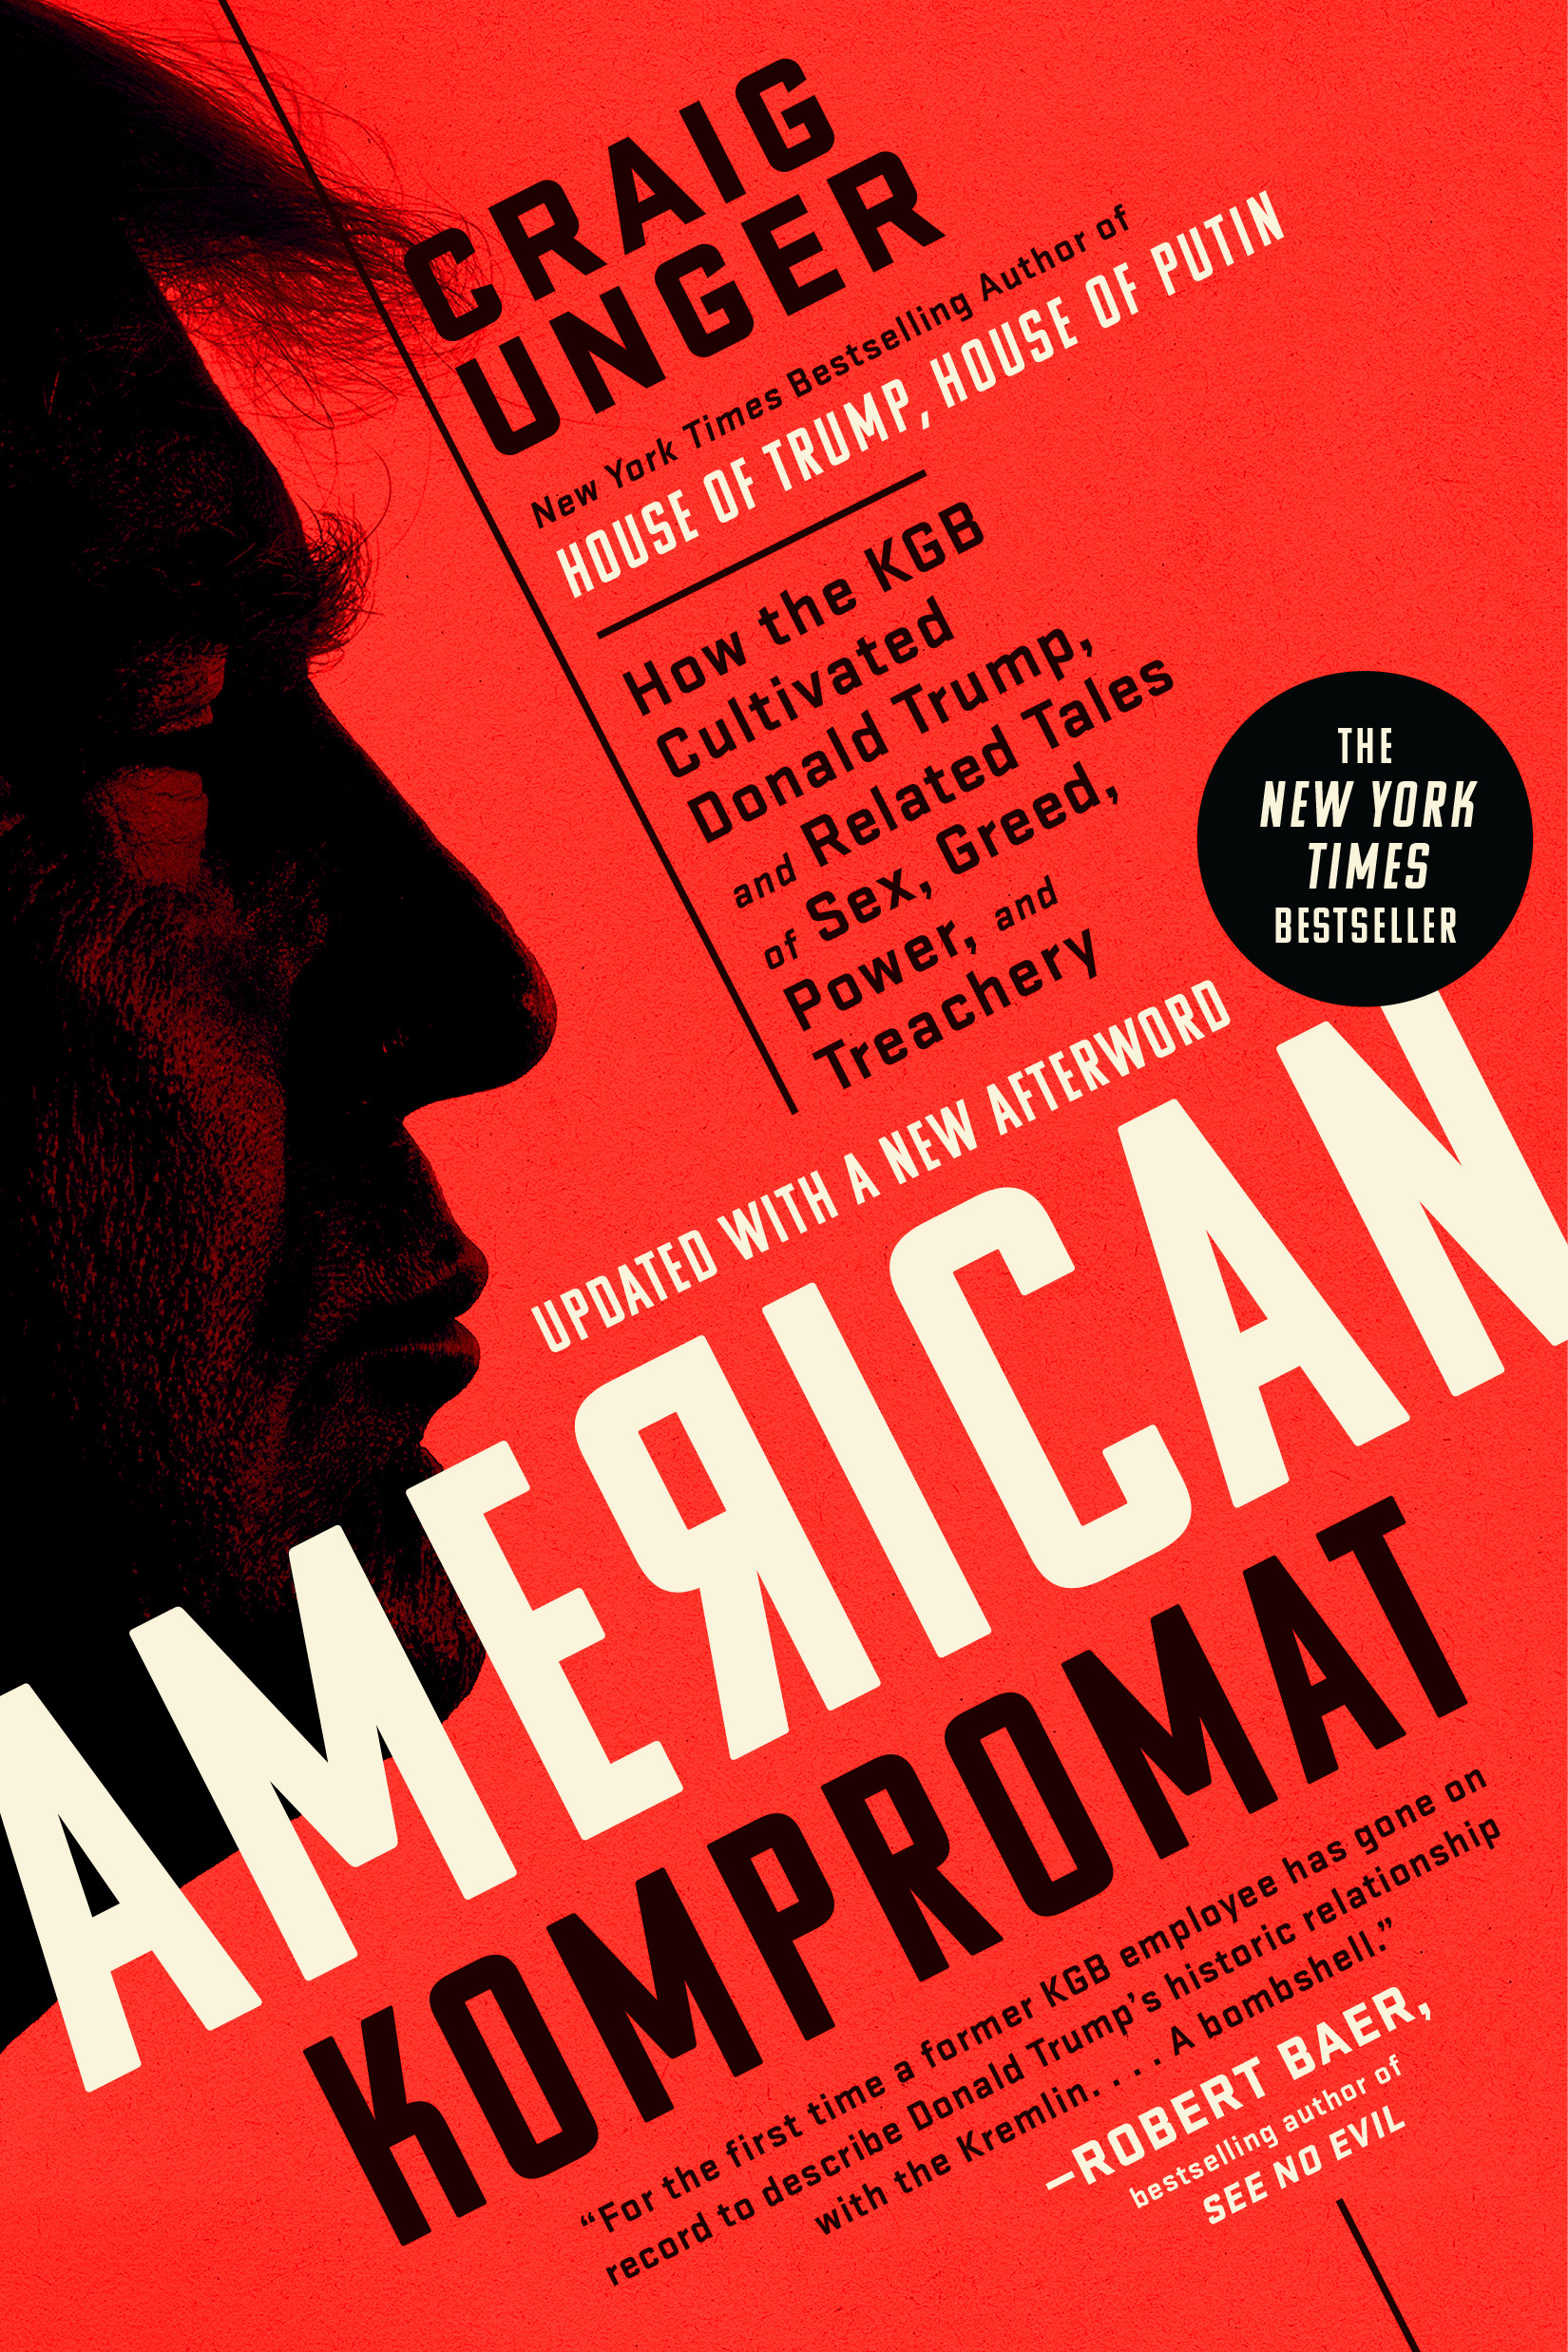 American Kompromat : How the KGB Cultivated Donald Trump, and Related Tales of Sex, Greed, Power, and Treachery | Unger, Craig